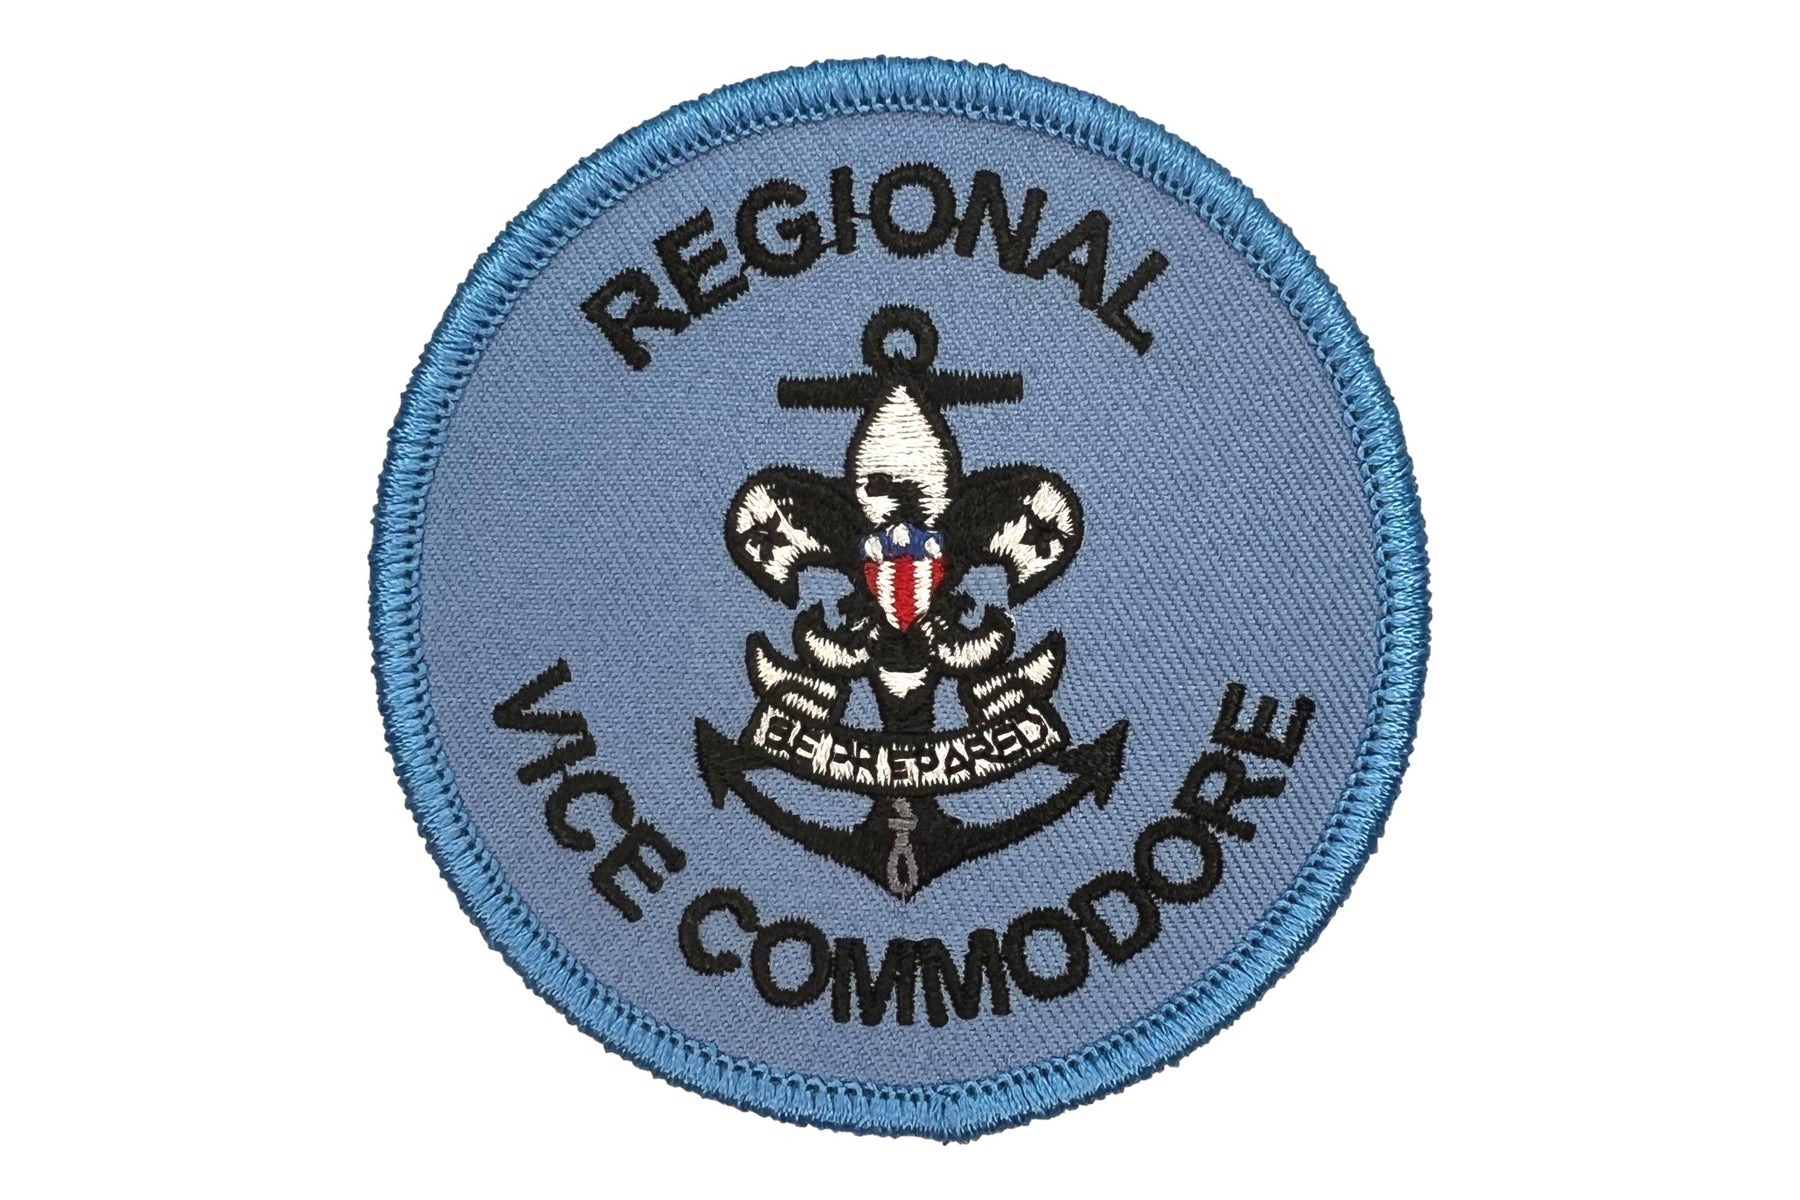 Sea Scout Regional Vice Commodore on Blue Twill